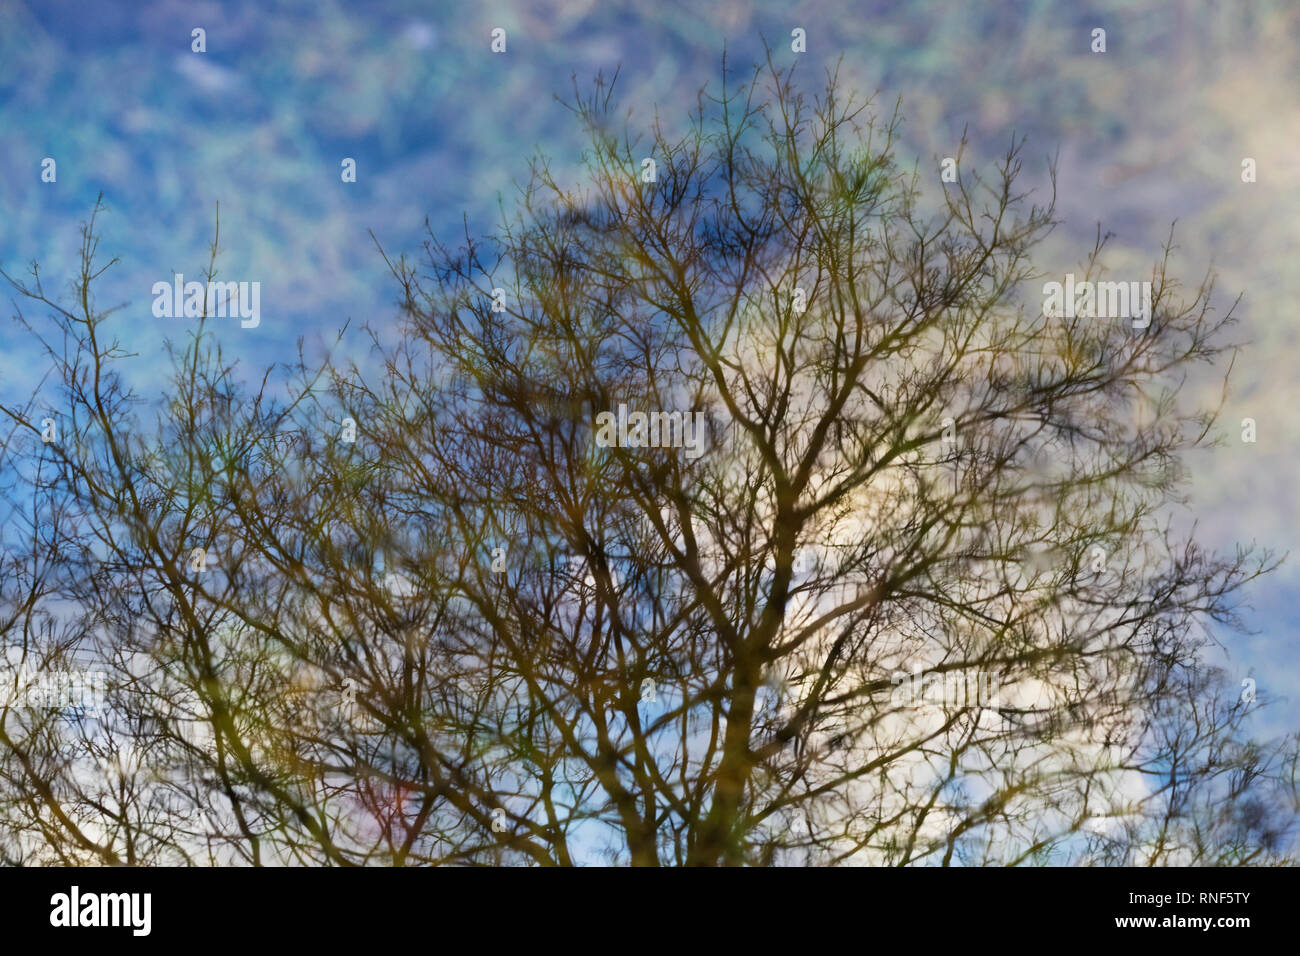 Tree and sky reflection in a melted snow puddle during the winter season in Toronto, Ontario, Canada. Stock Photo